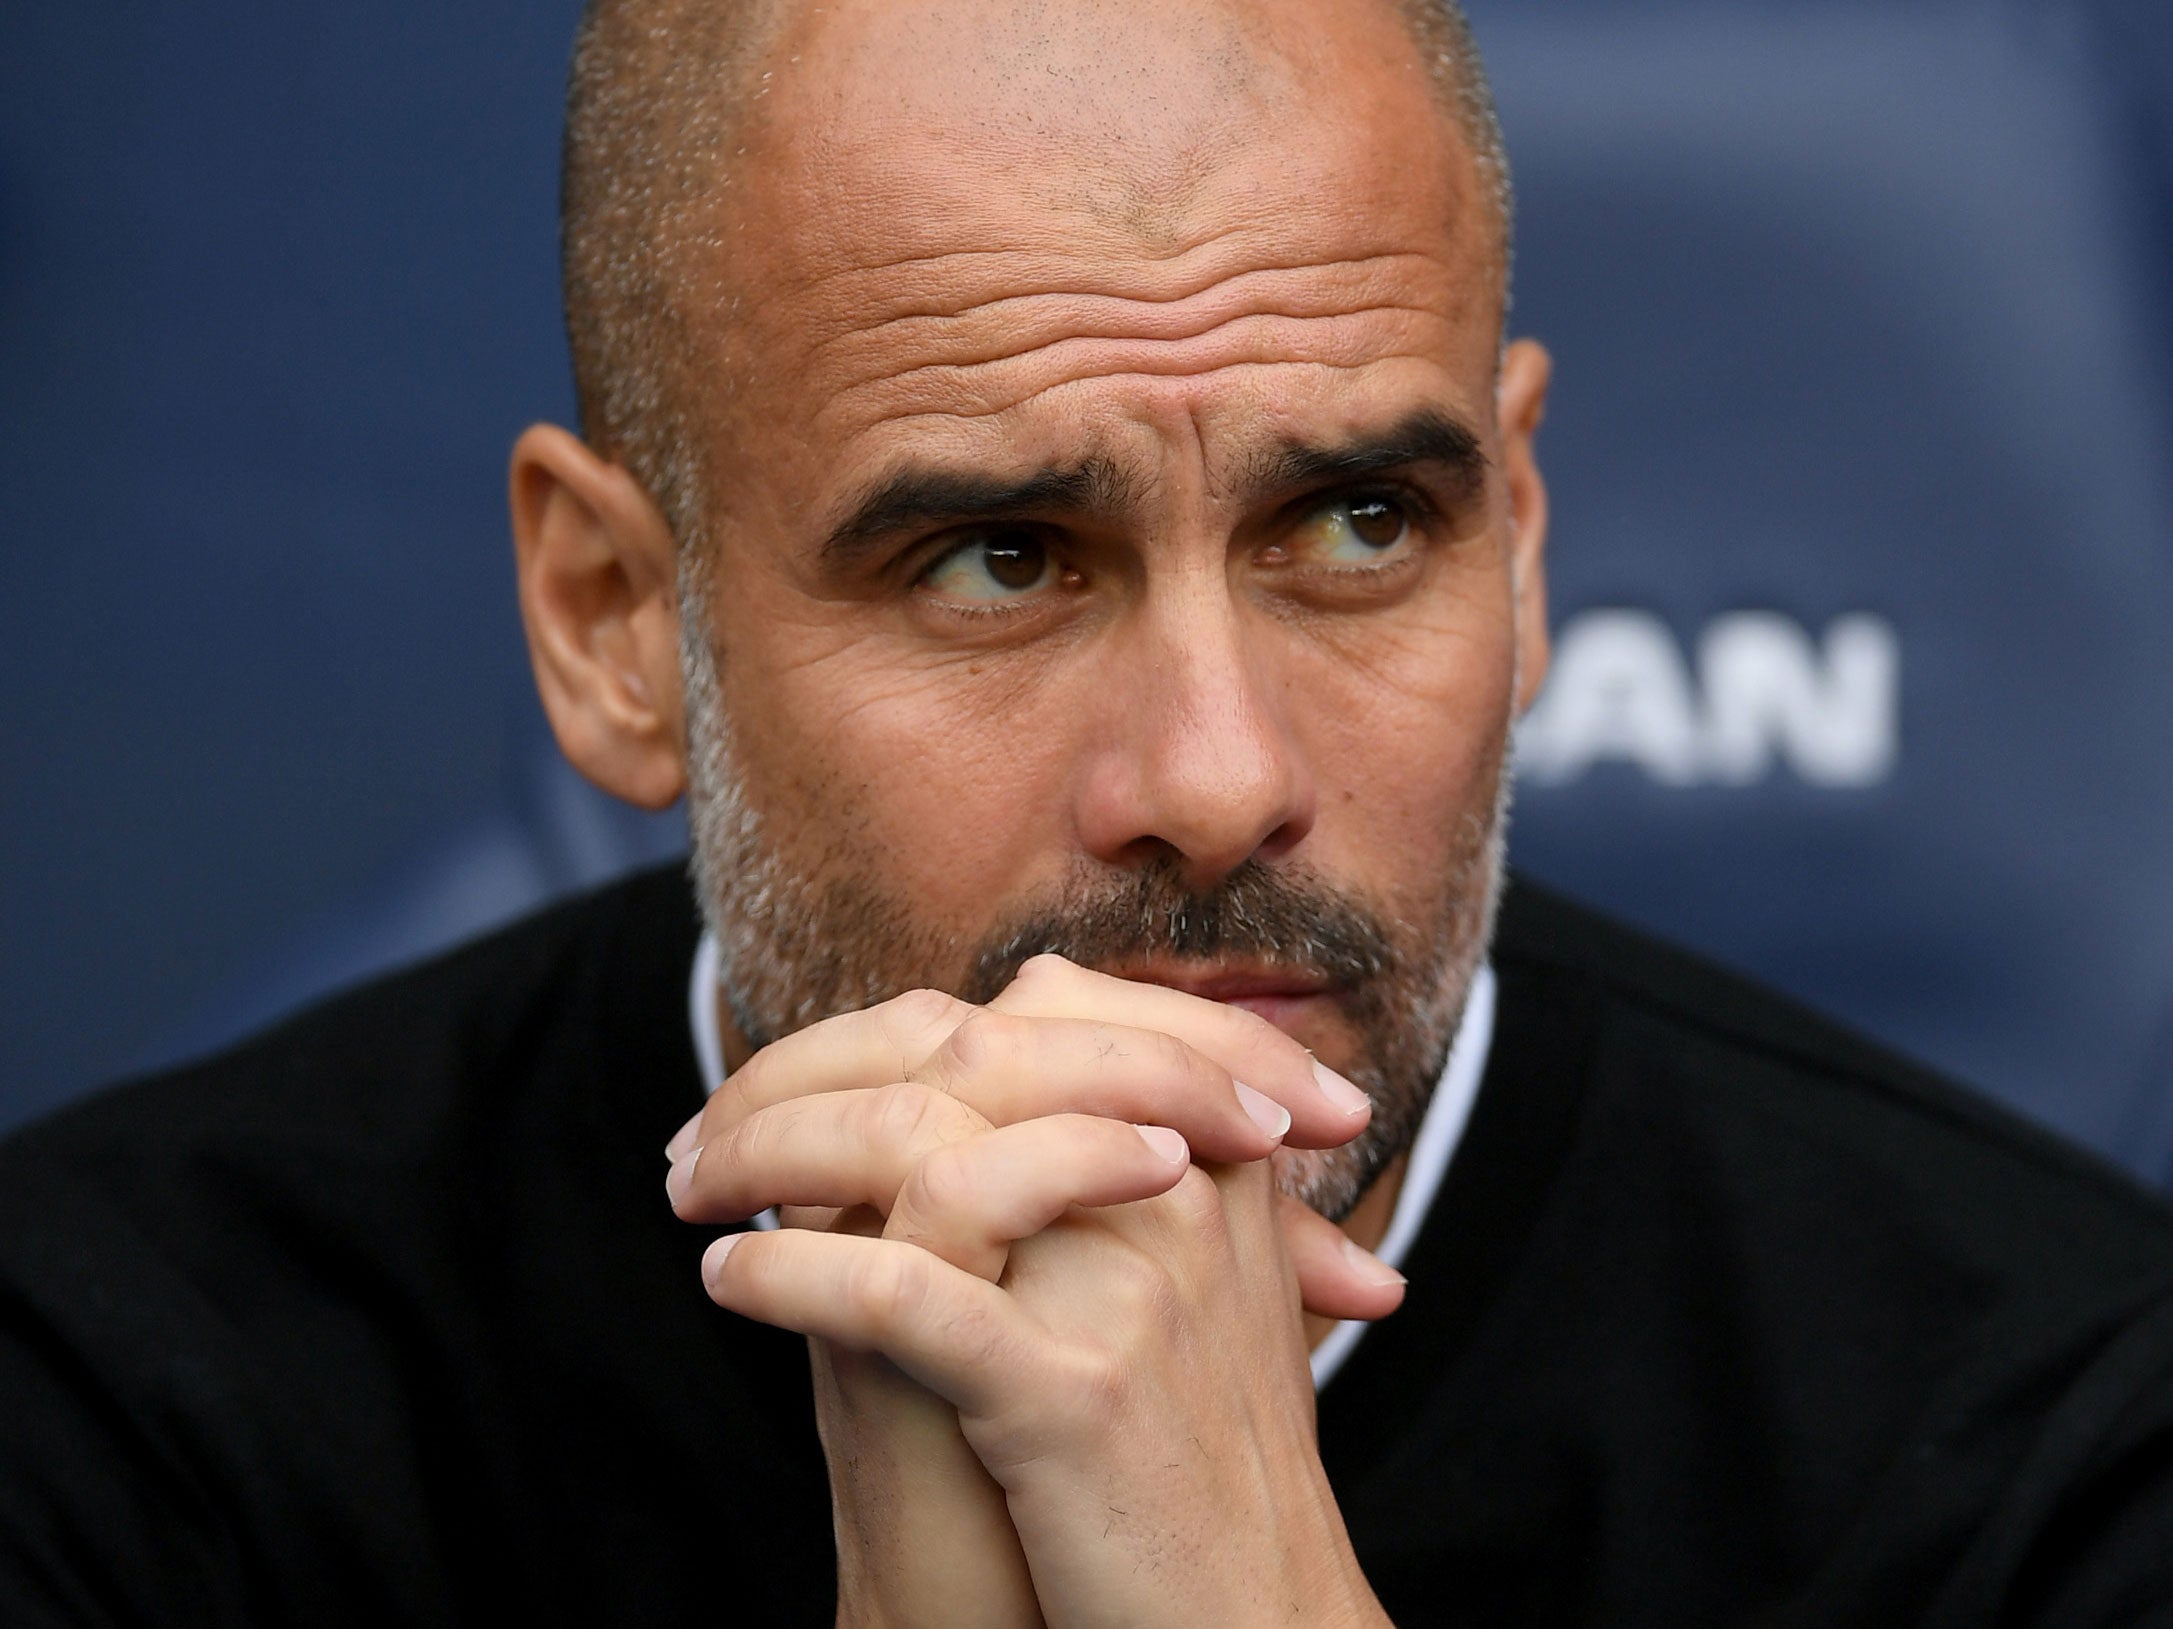 Pep Guardiola believes Manchester City will improve in next year's Champions League